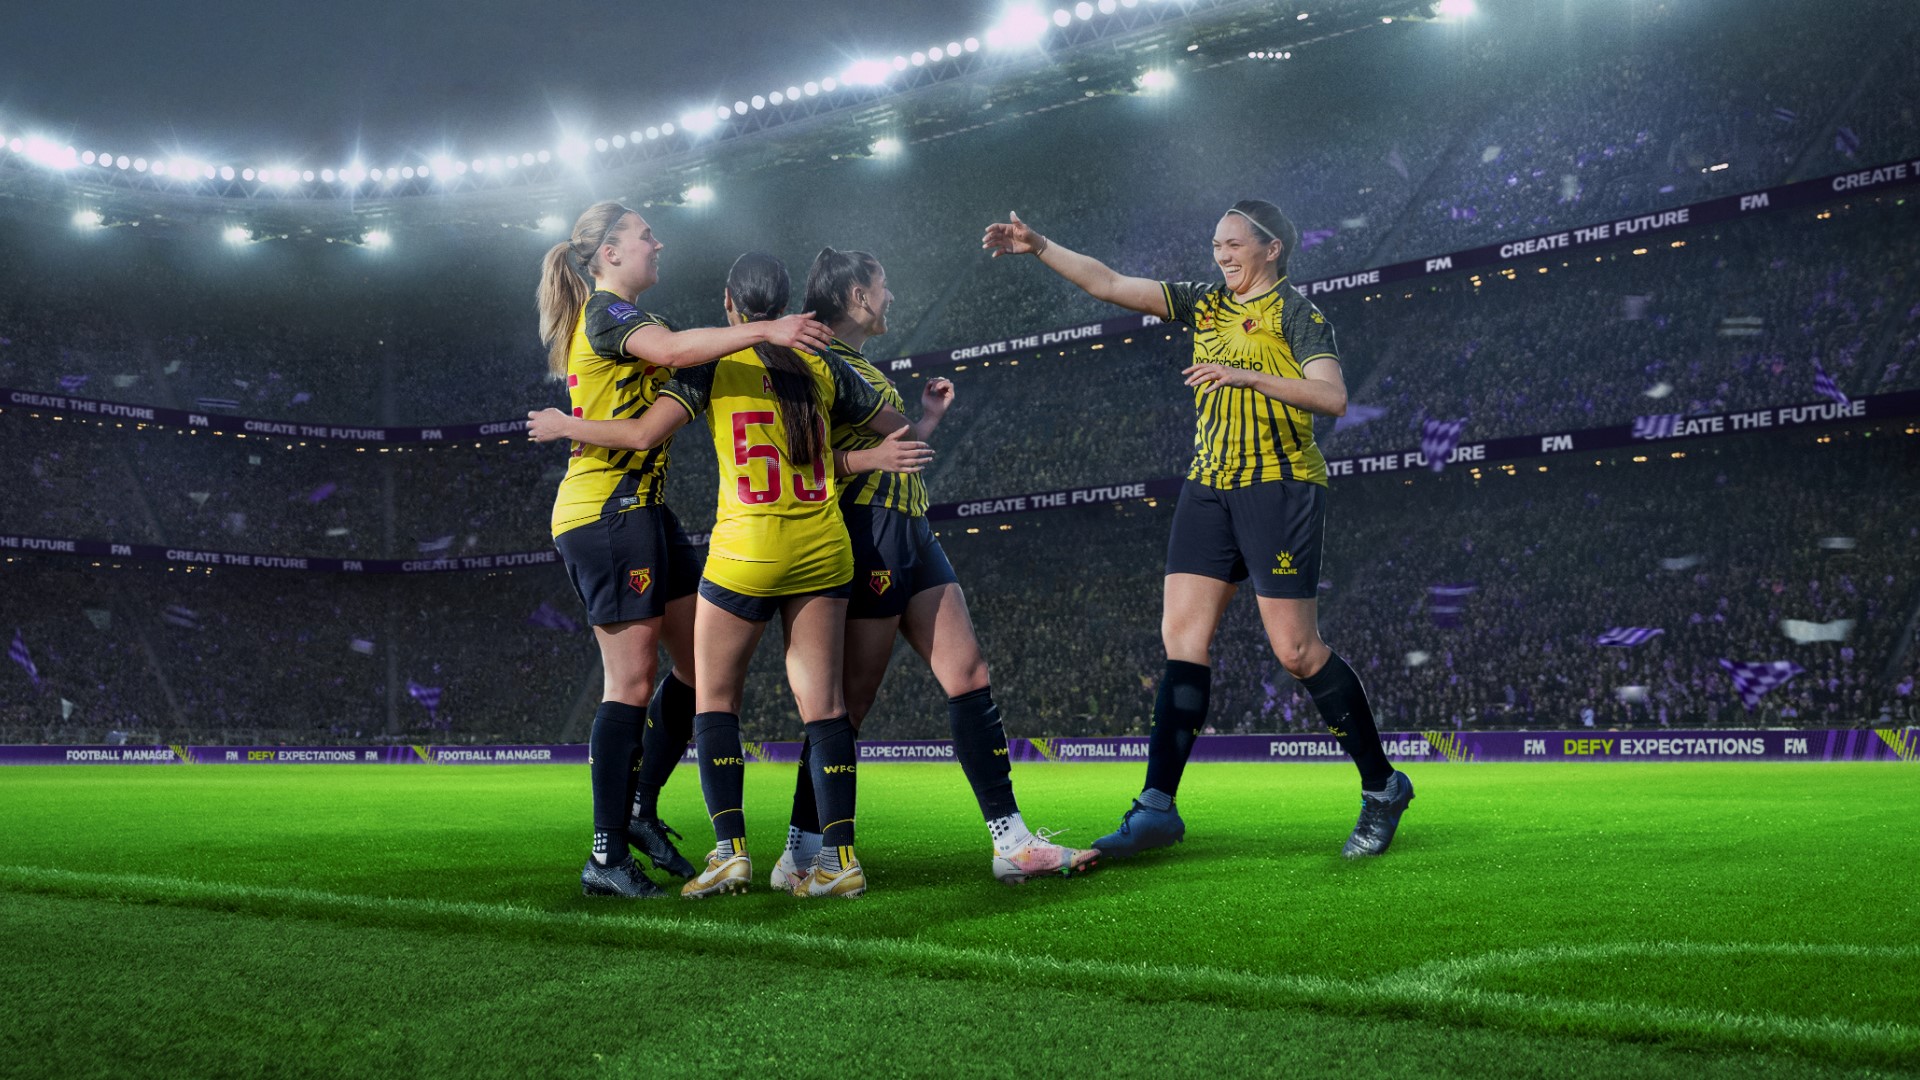 Football Manager will soon include women’s football